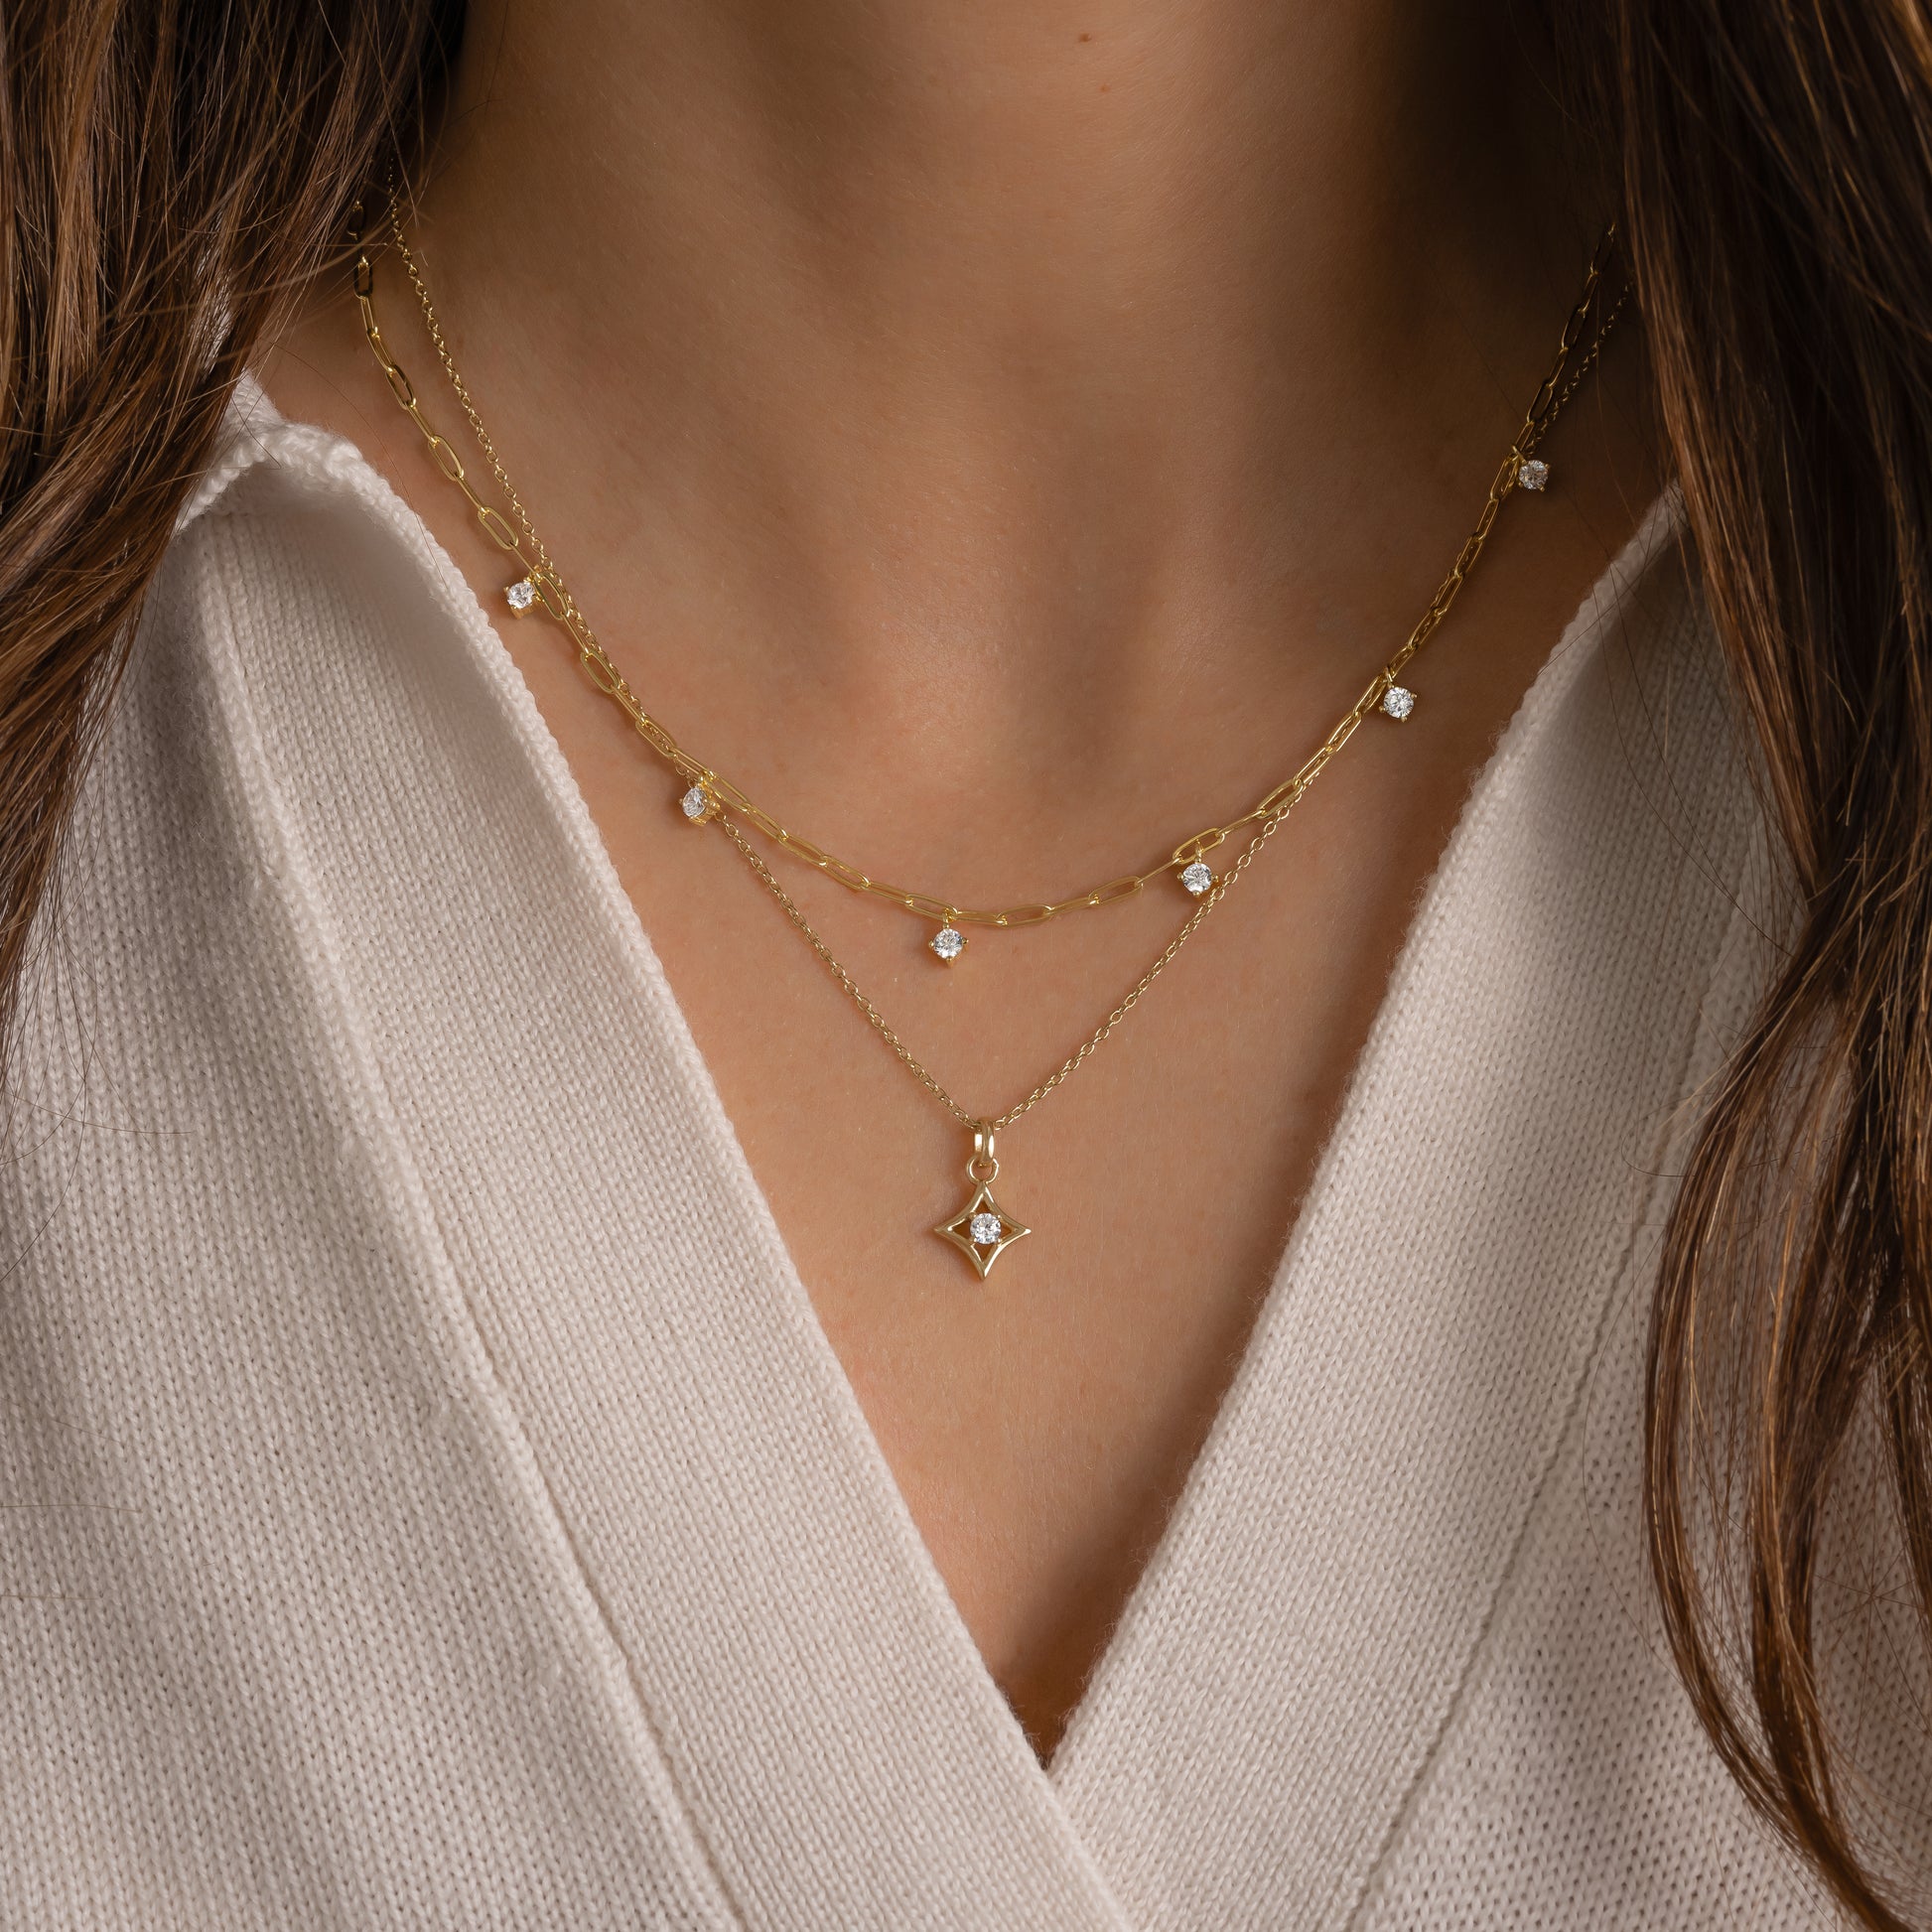 gold paperclip necklace with diamond charms